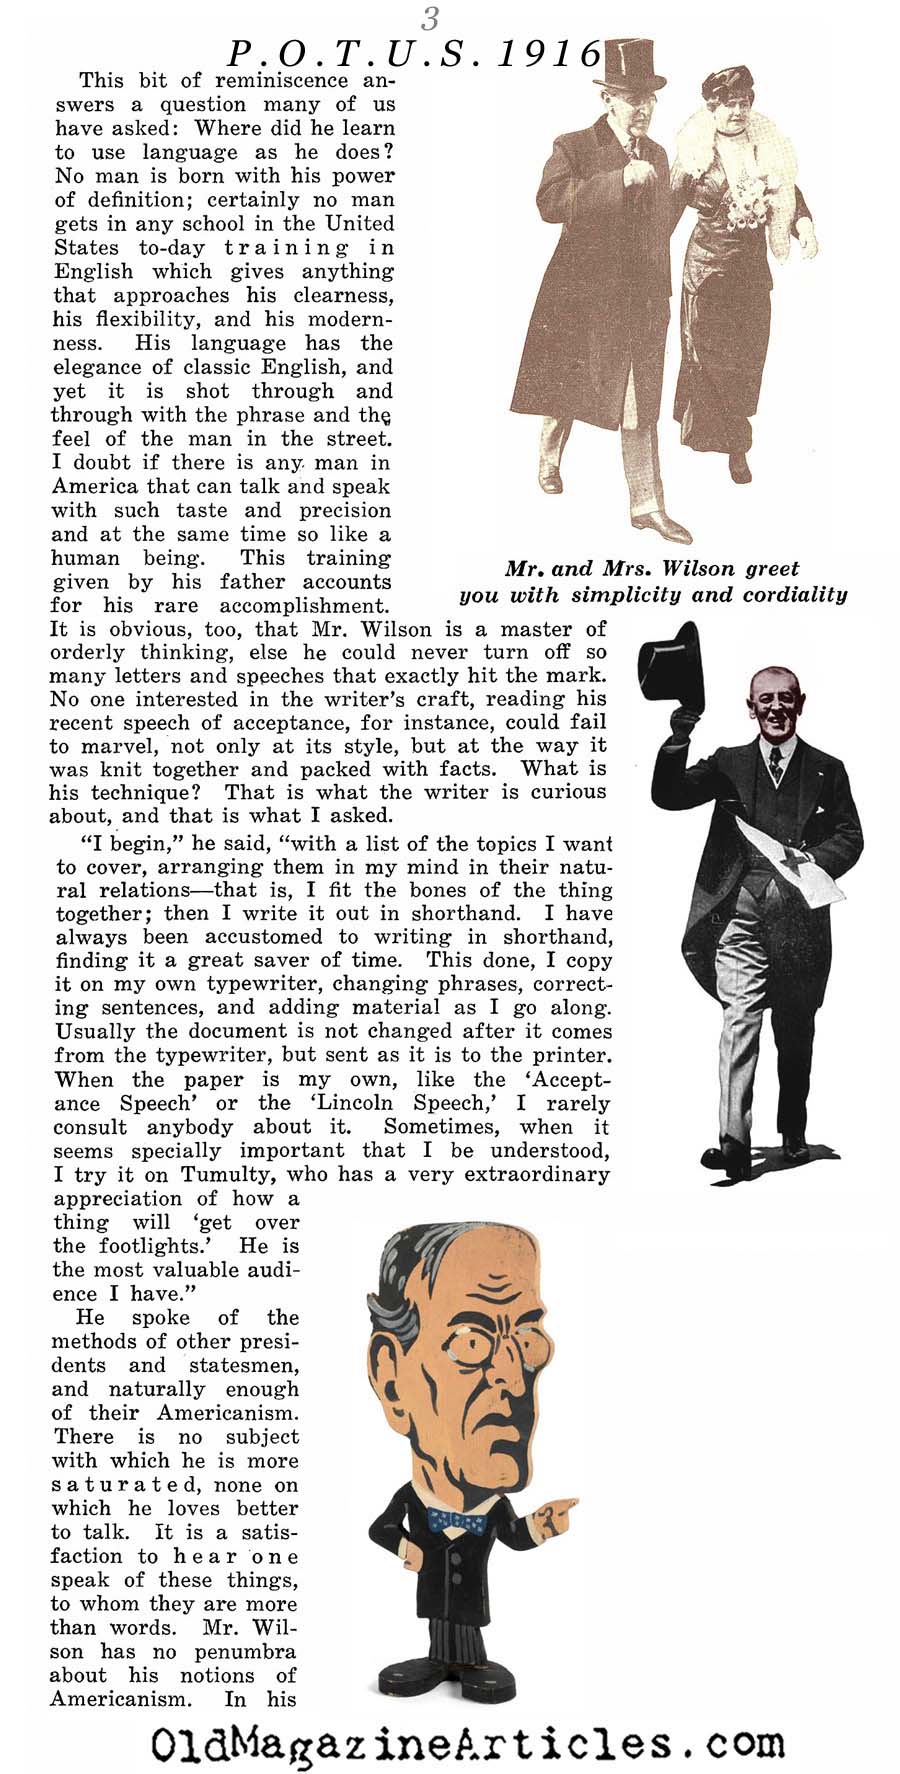 An Interview with Woodrow Wilson (Collier;s Magazine, 1916)